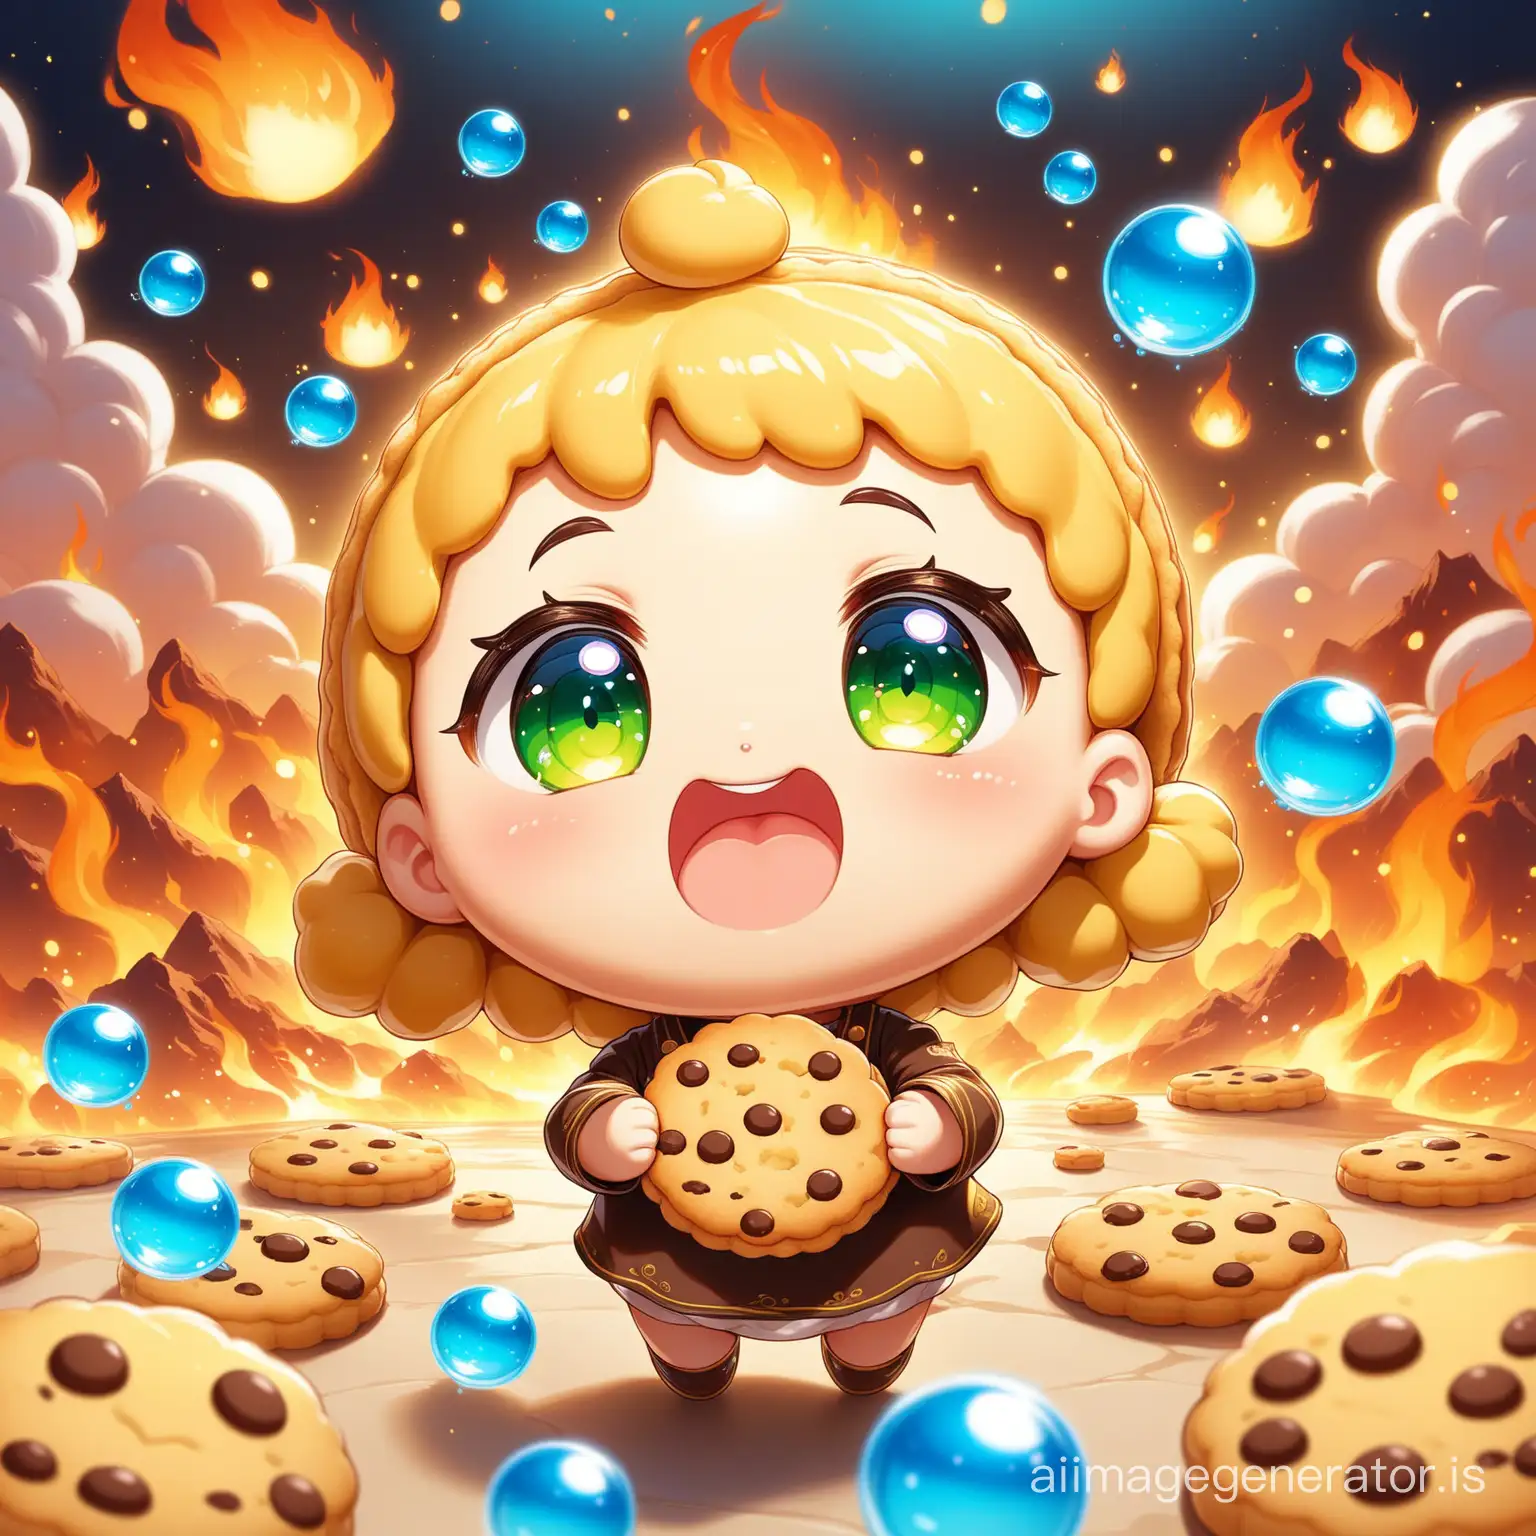 A little happy cute cookie with green eye and mouth walking in cook and fire land 
super detail and High Quality
big and blue Bubble and floating cookie are seen everywhere
Details are evident beautifully and with great precision